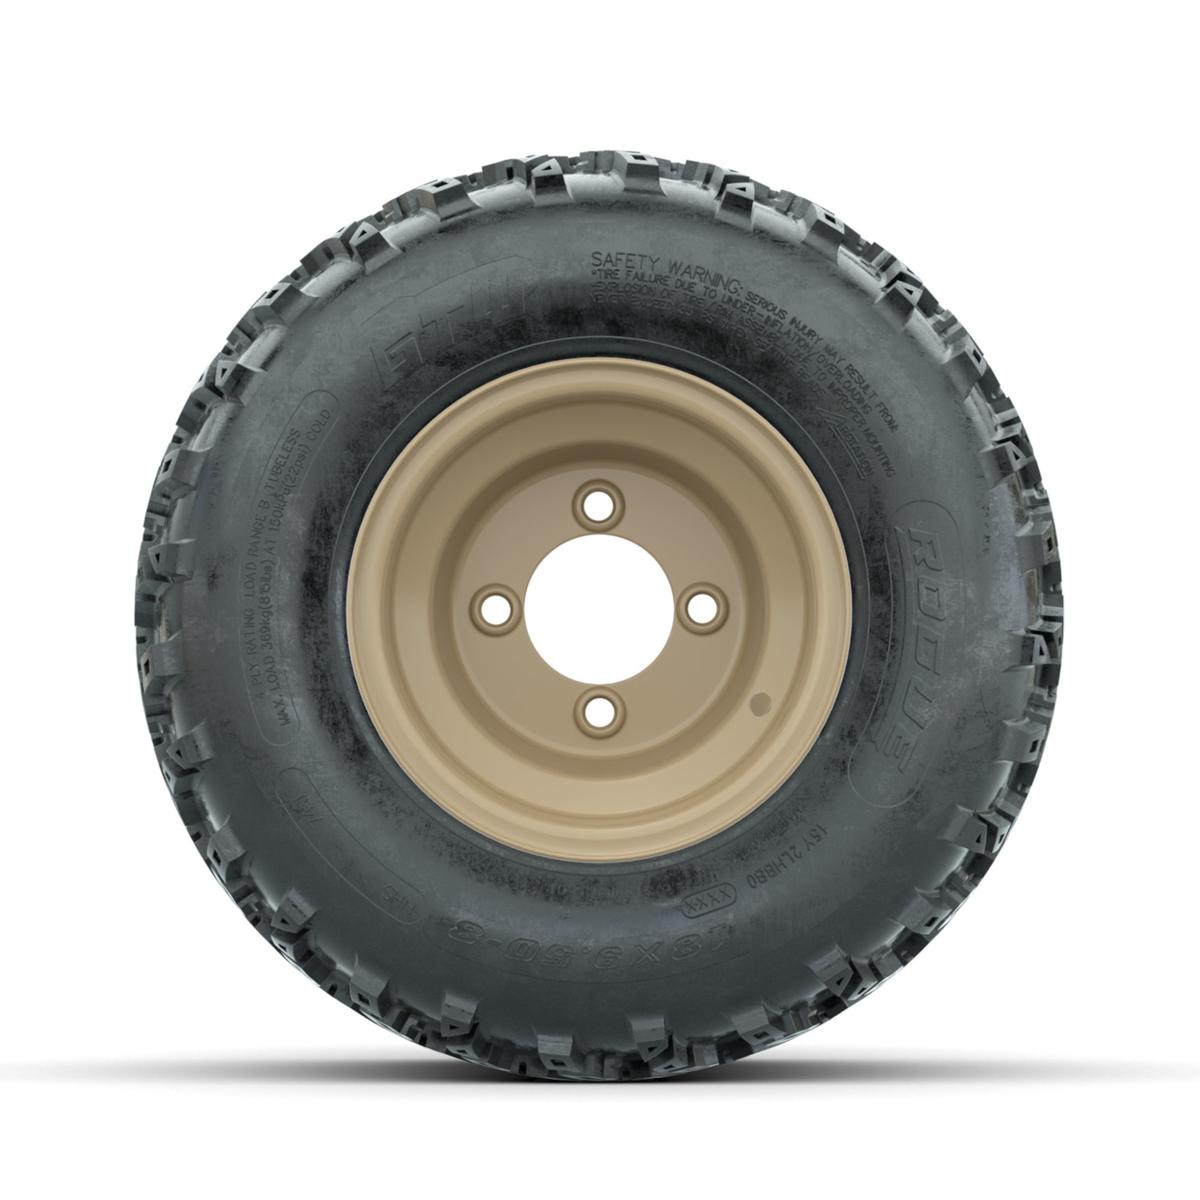 GTW Steel Stone Grey Centered 8 in Wheels with 18x9.50-8 Rogue All Terrain Tires – Full Set